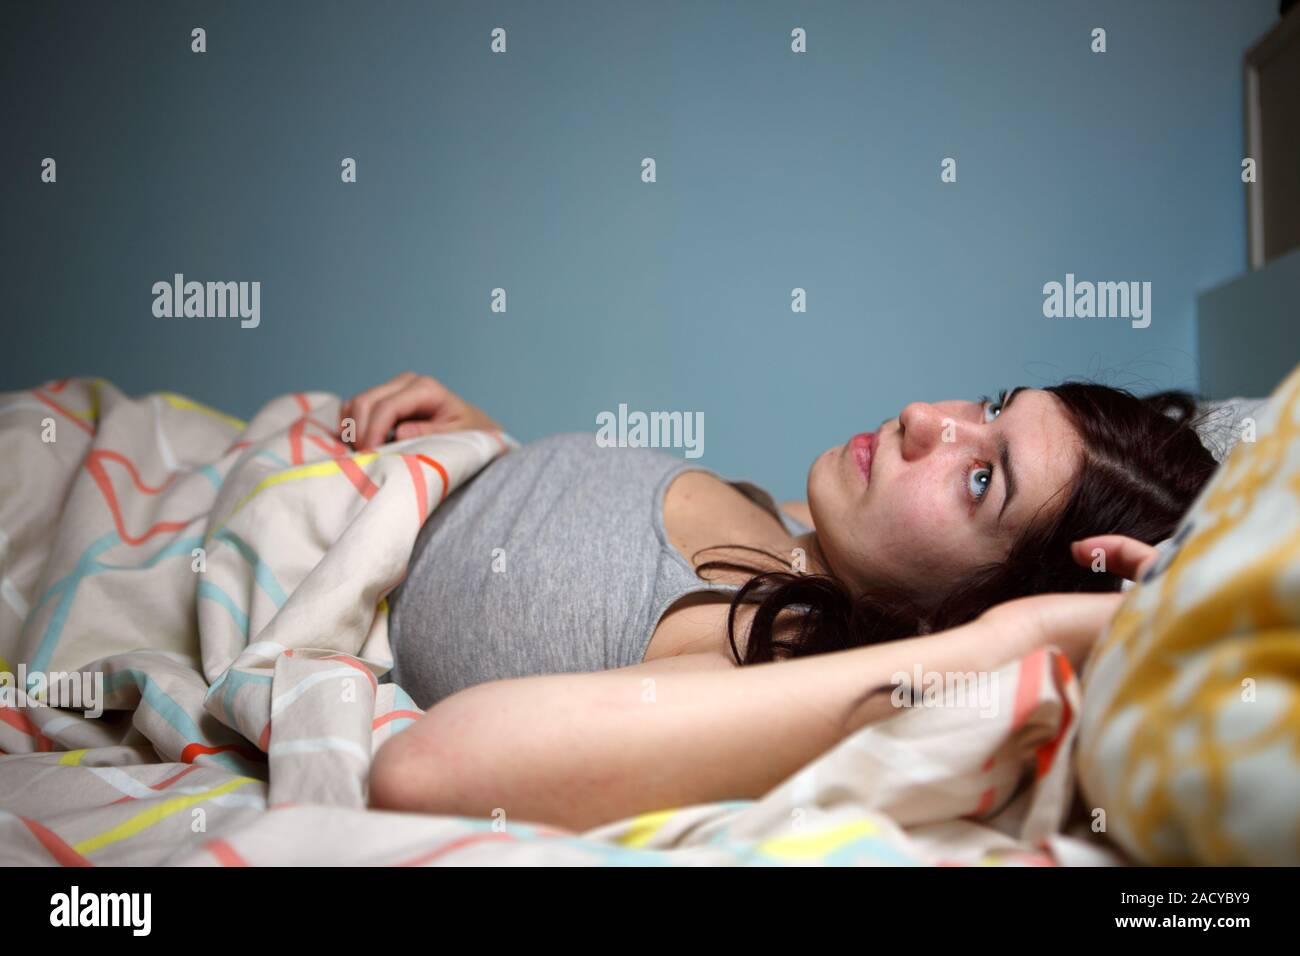 Young woman lying in bed suffering with insomnia  Noisy neighbour, stress, alarm sound, prevent from sleep concept Stock Photo